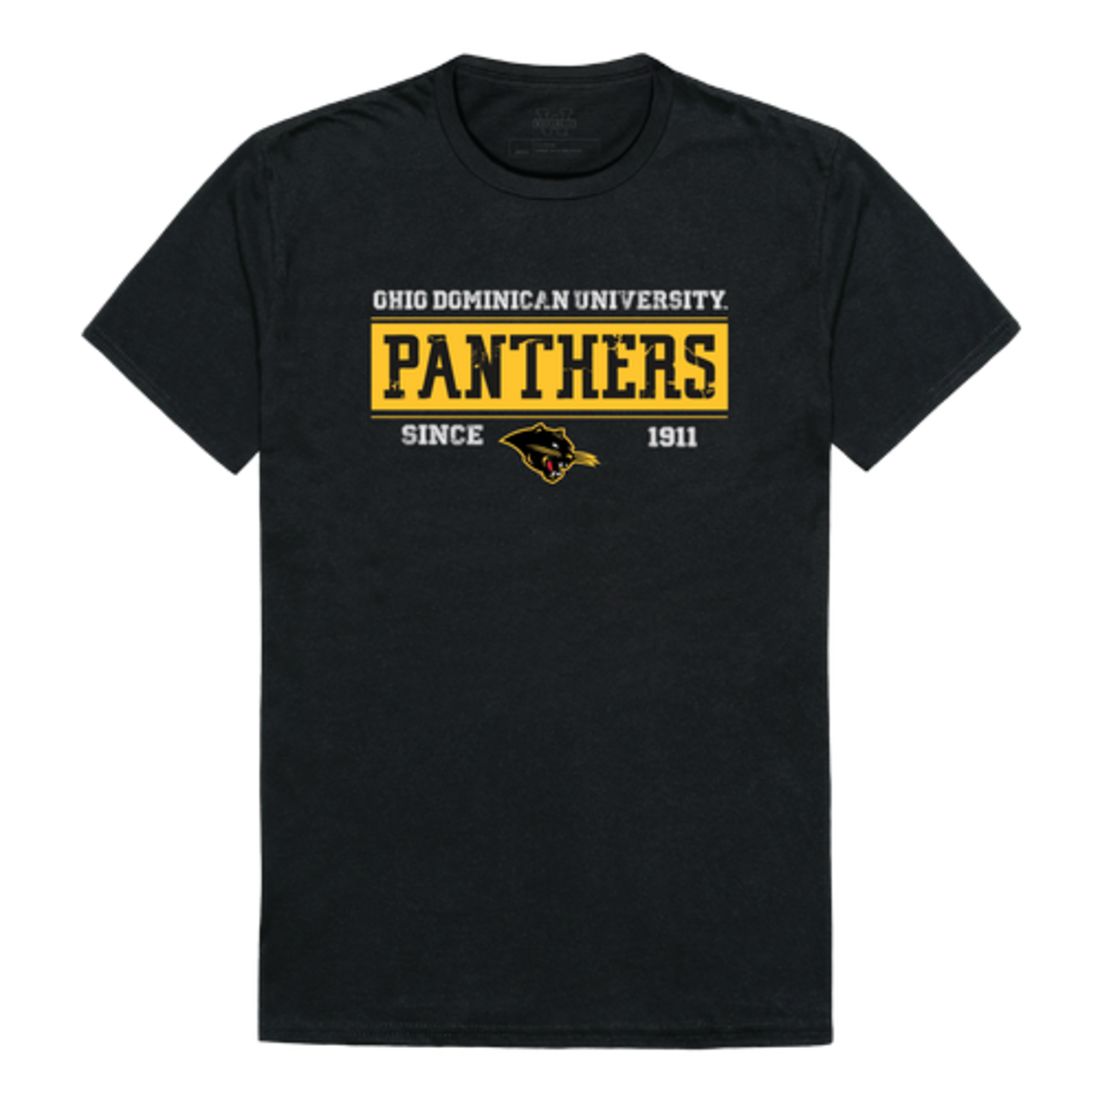 Ohio Dominican University Panthers Established T-Shirt Tee